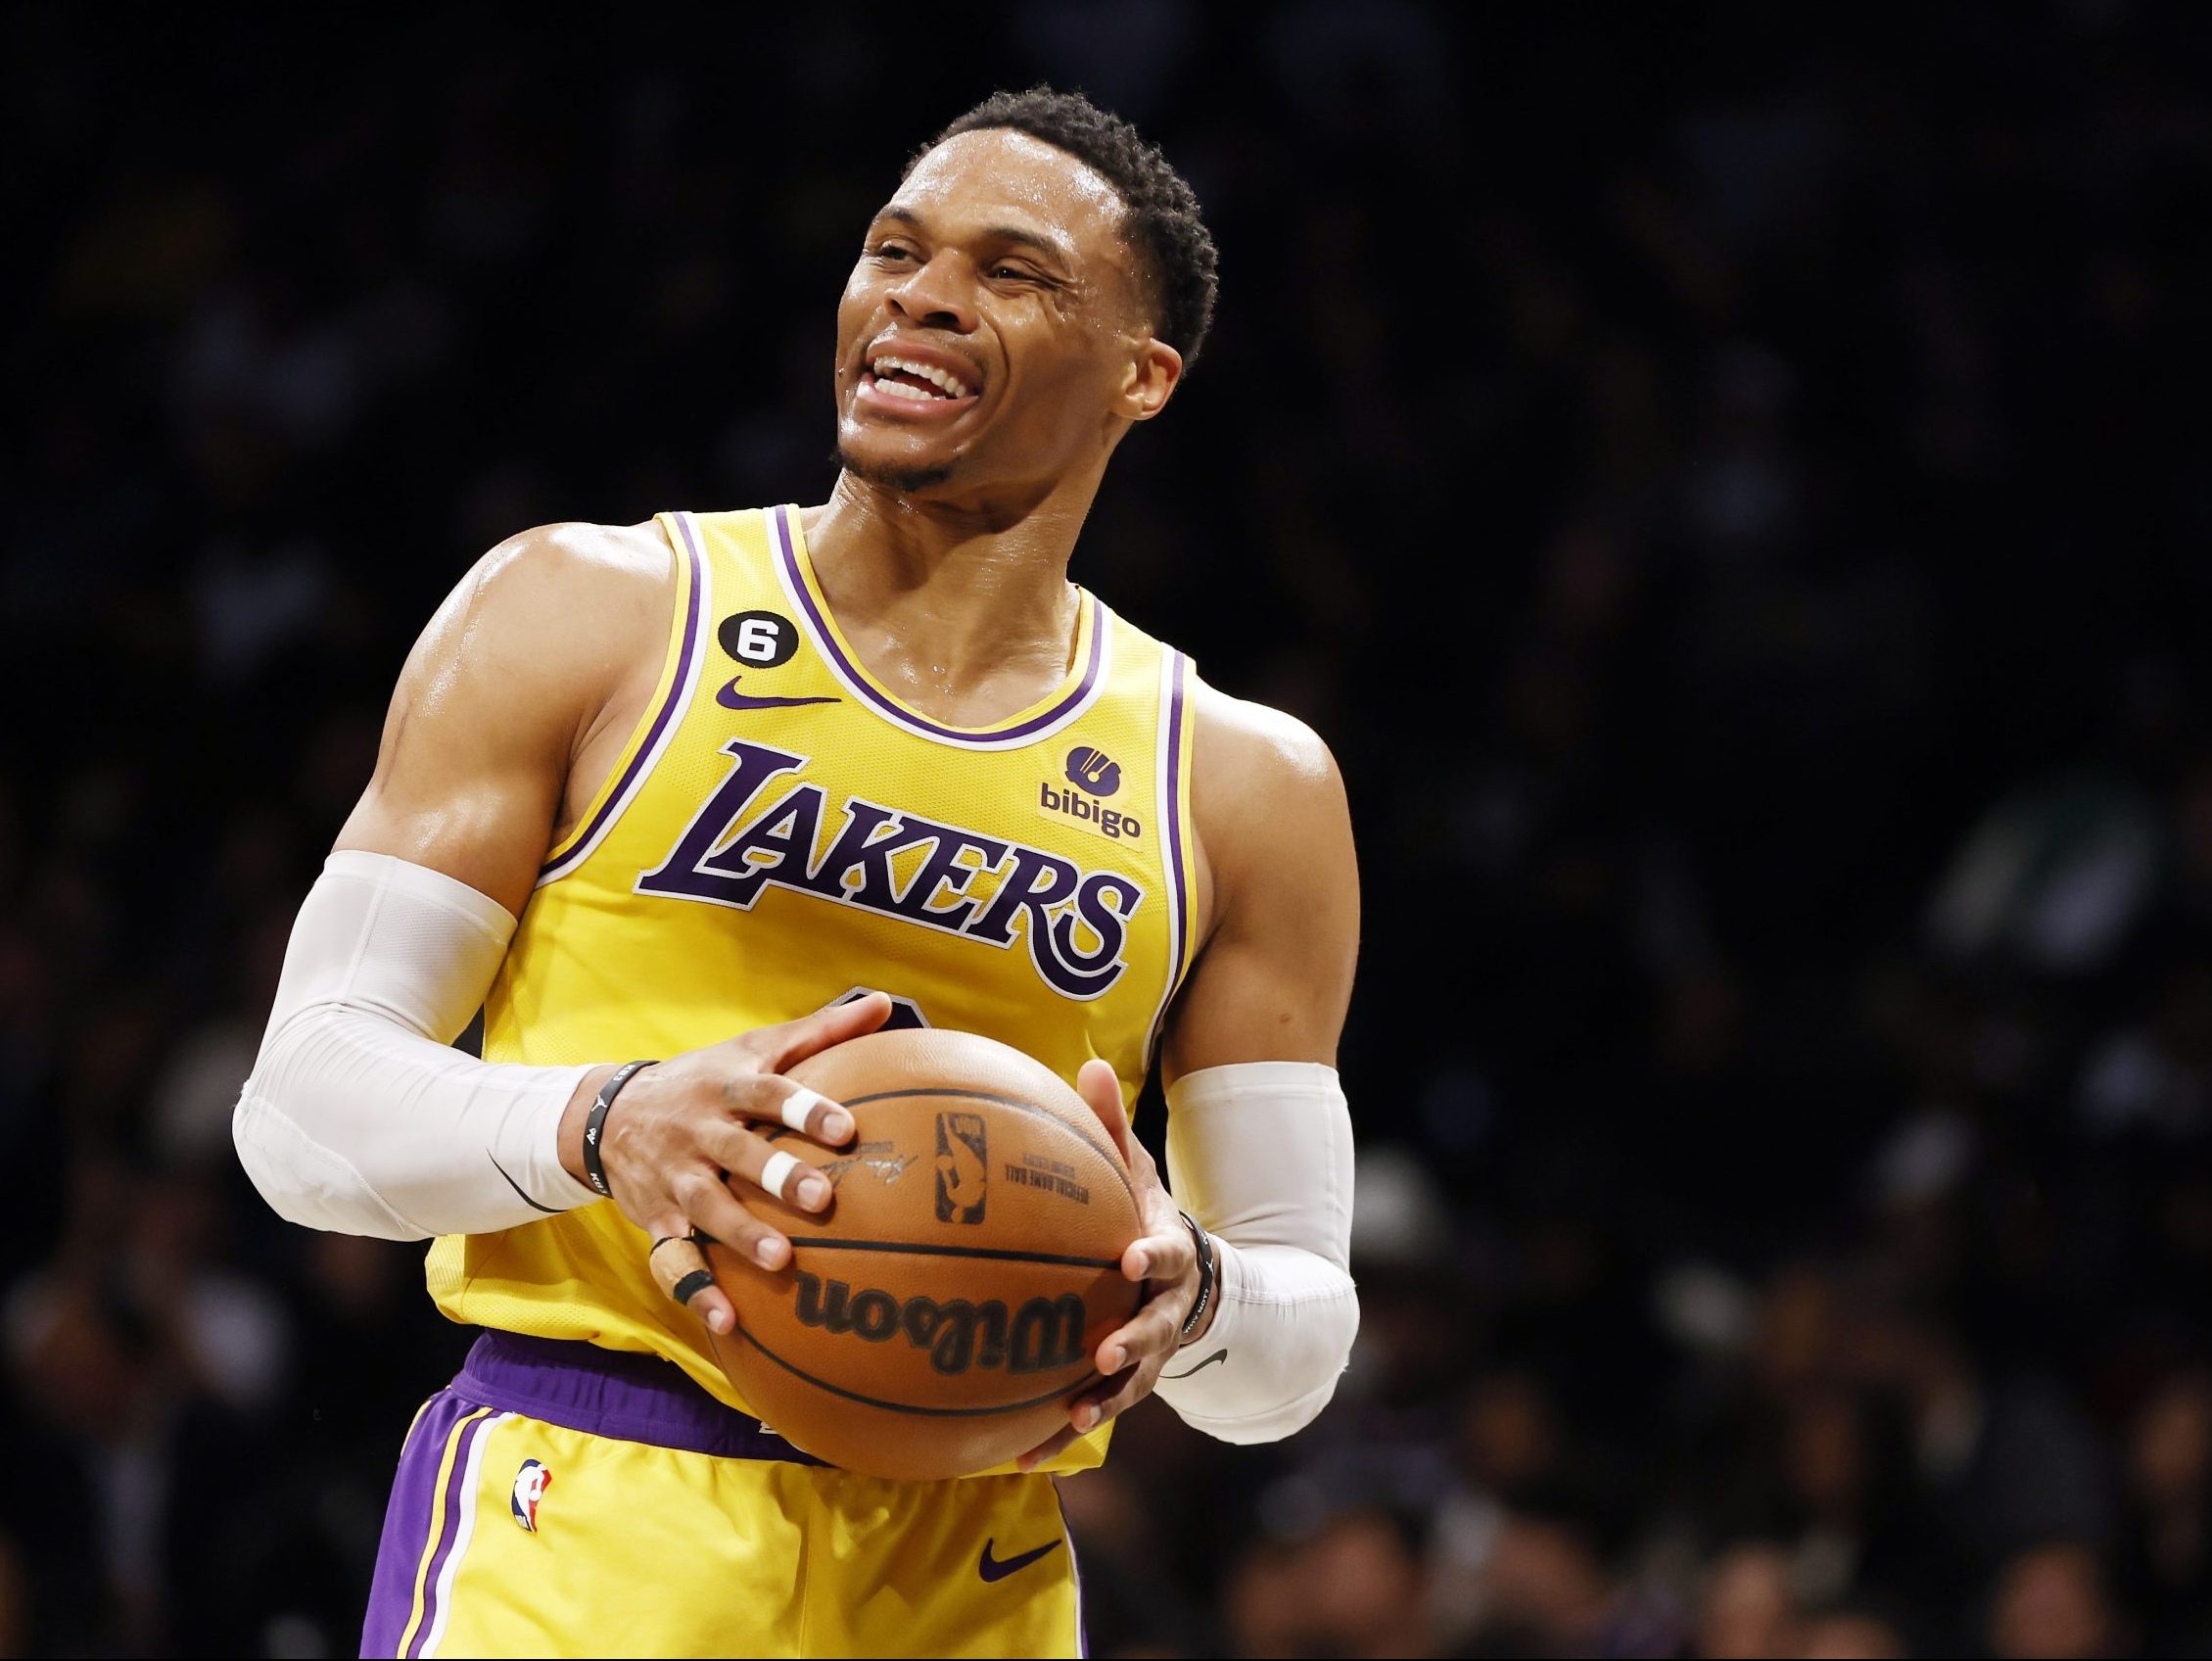 Russell Westbrook is enjoying a fresh start with the Lakers